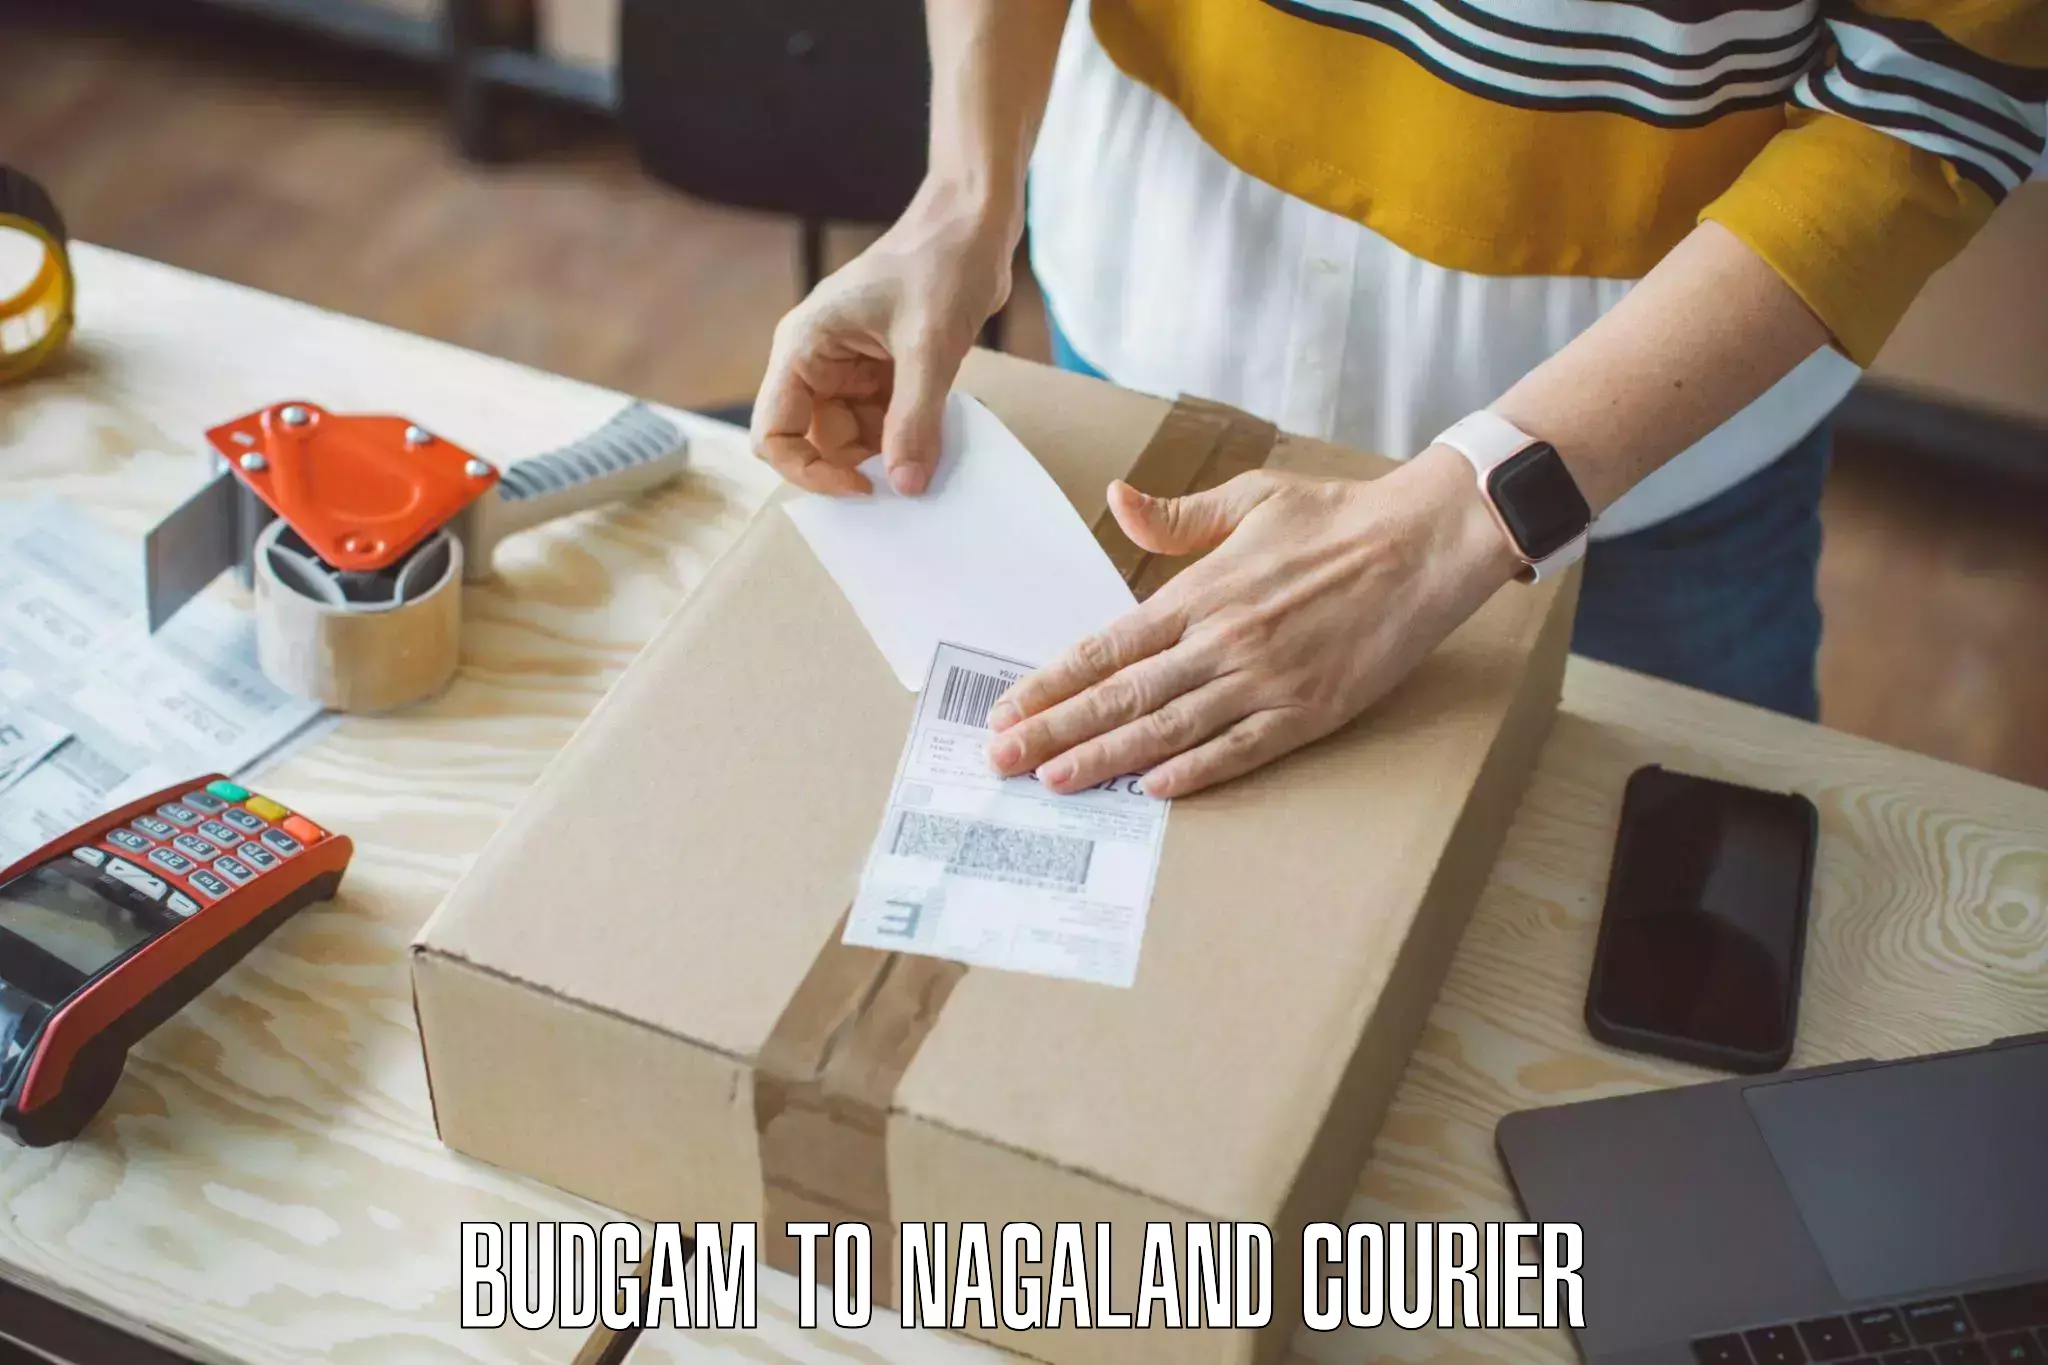 Furniture delivery service Budgam to Mokokchung